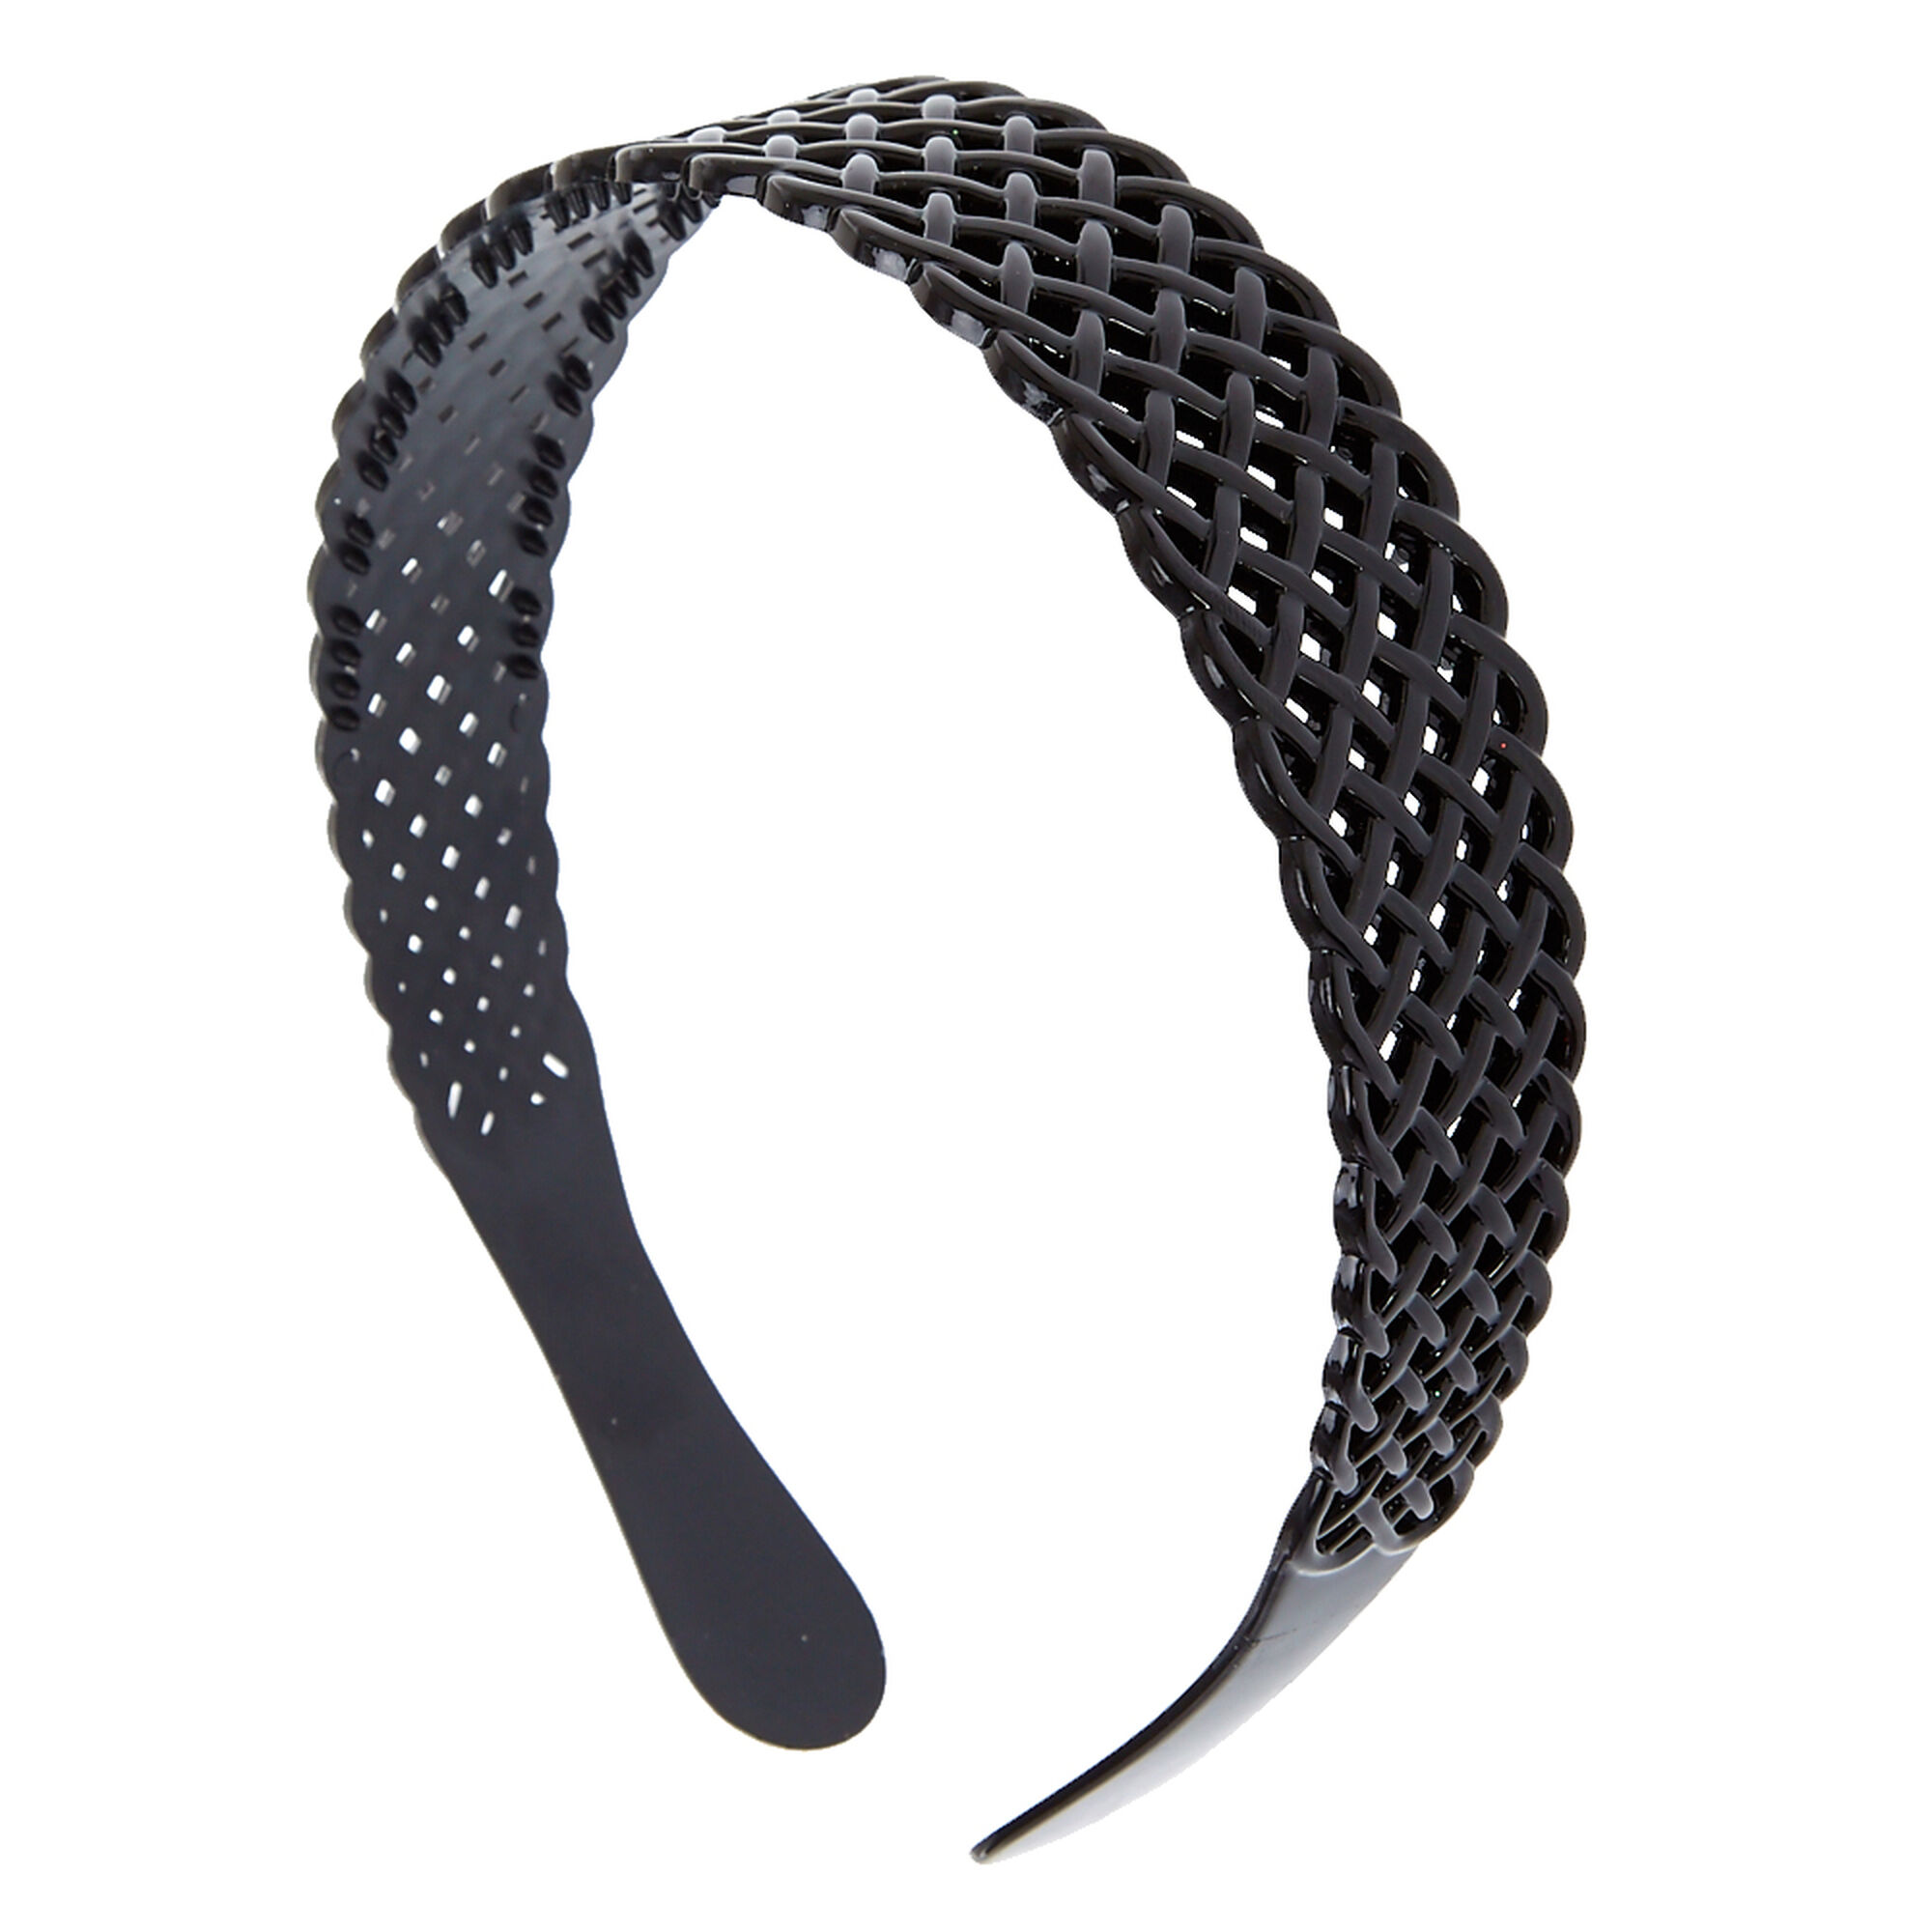 View Claires Waffle Headband Black information